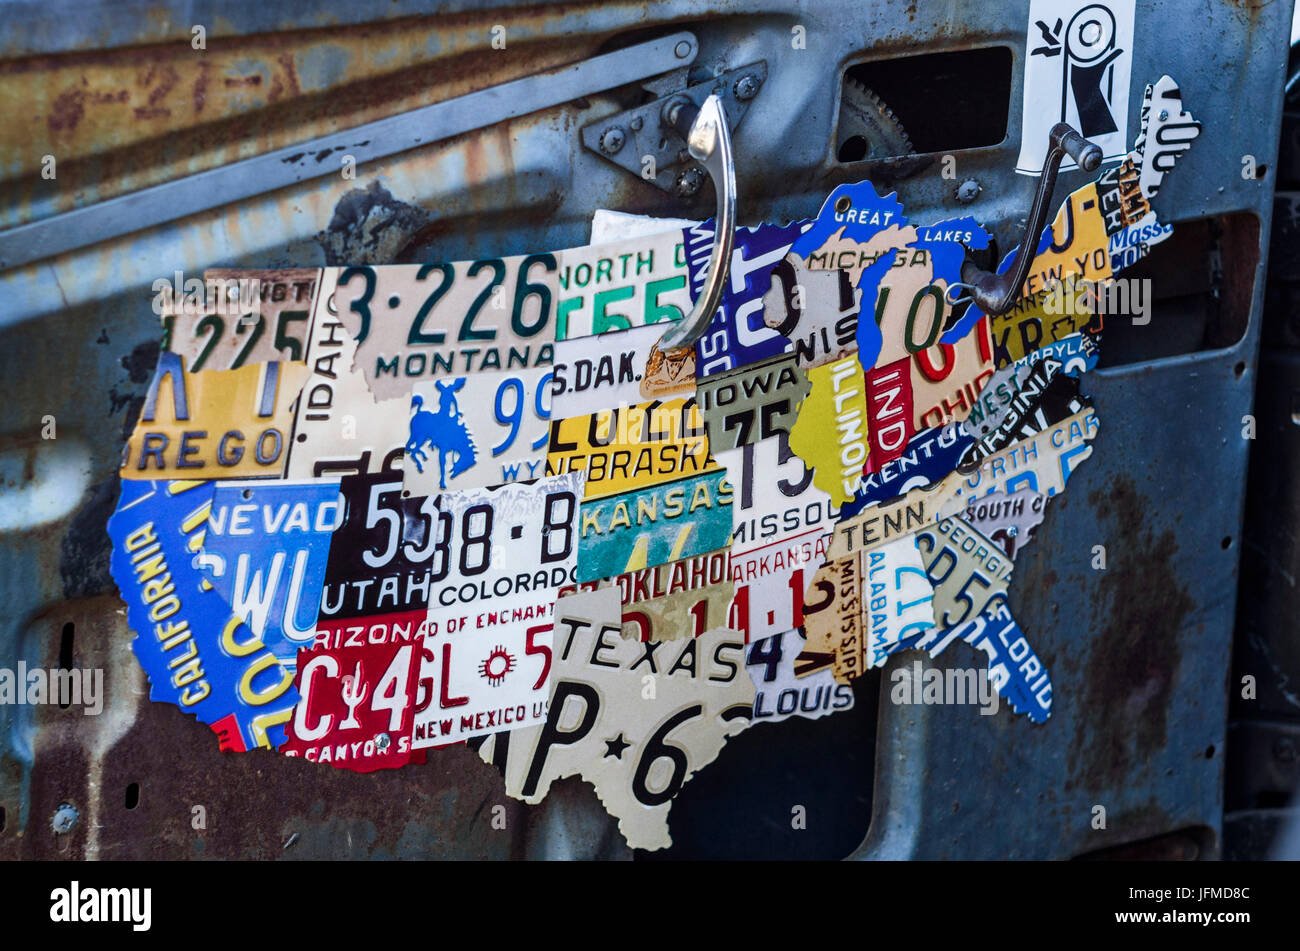 USA, Massachusetts, Cape Ann, Gloucester, classic cars, 1950's-car interior with US map made of license plates Stock Photo